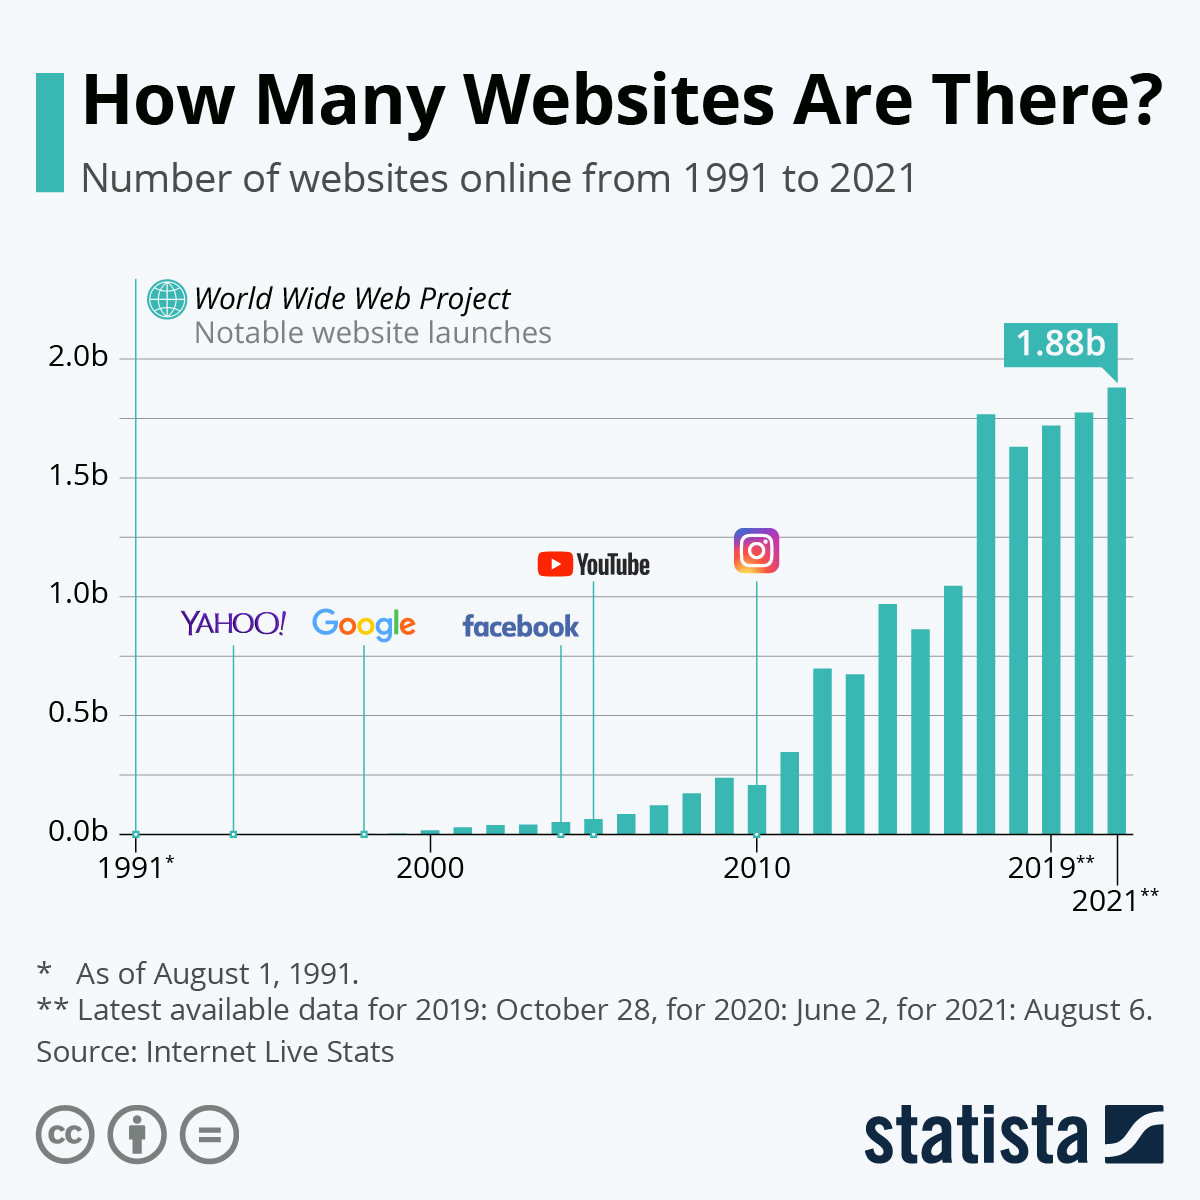 Number of websites online from 1991 to 2021